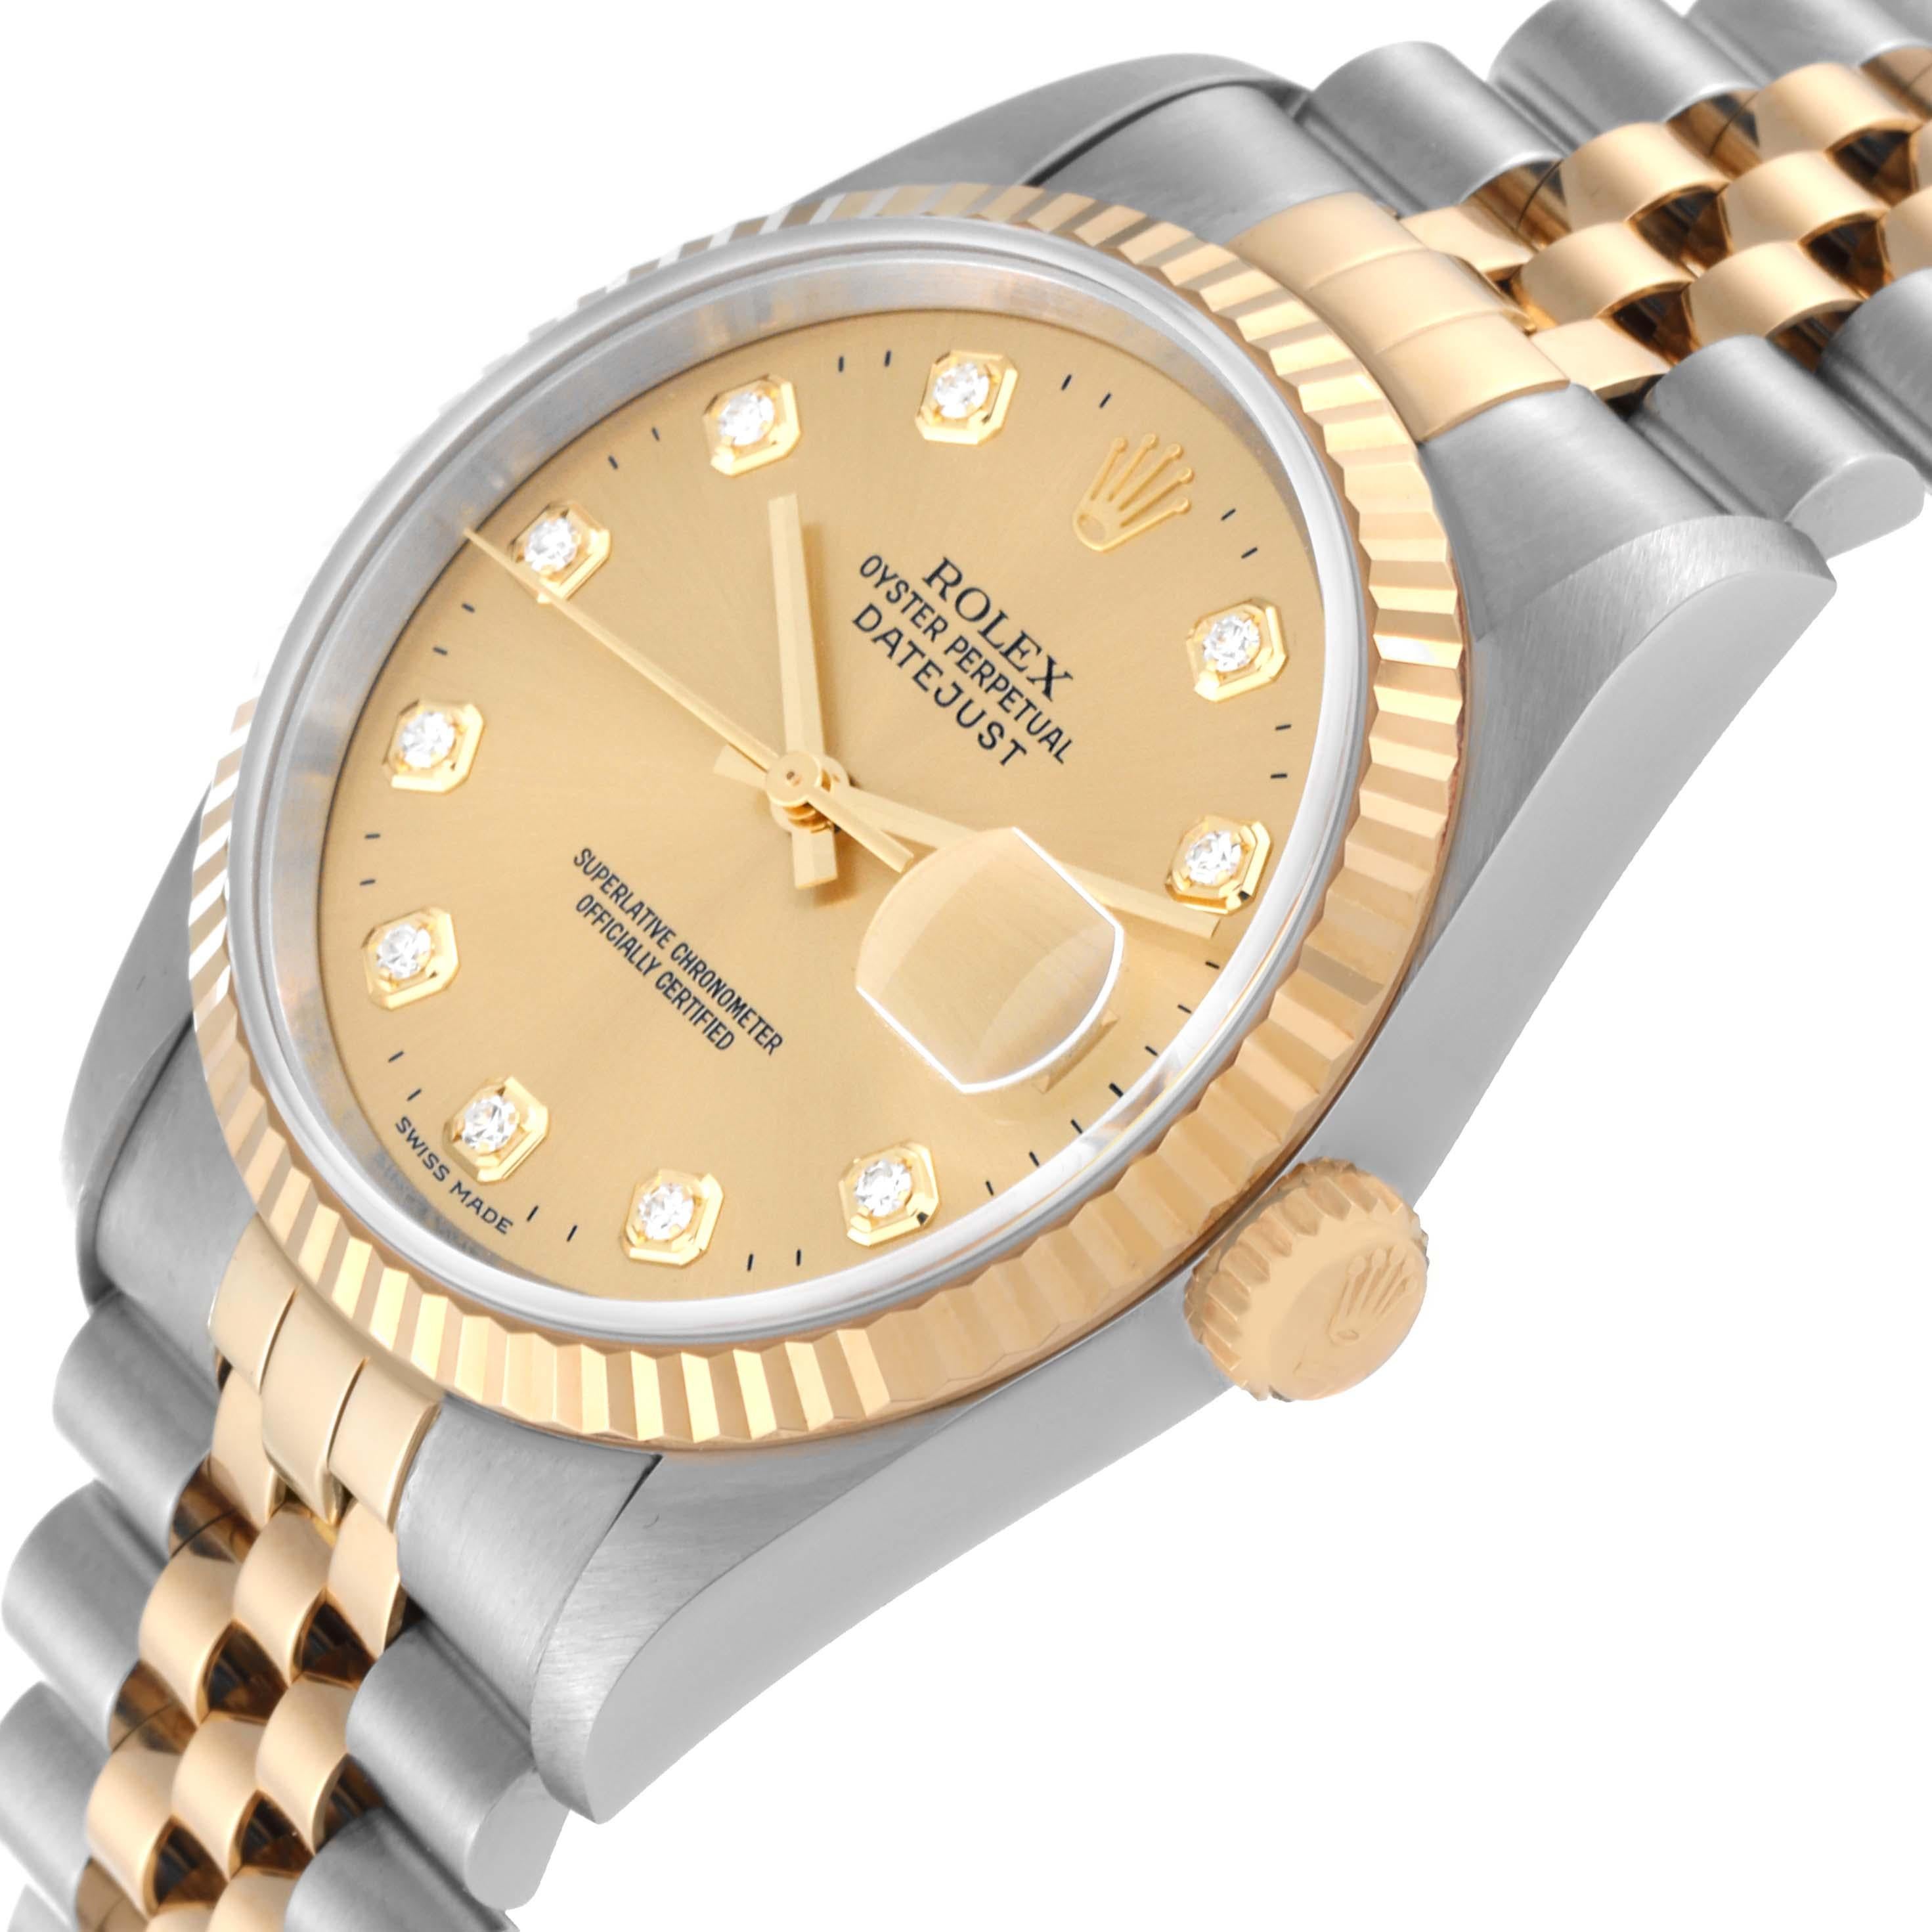 Rolex Datejust Diamond Dial Steel Yellow Gold Mens Watch 16233 Box Papers In Excellent Condition For Sale In Atlanta, GA